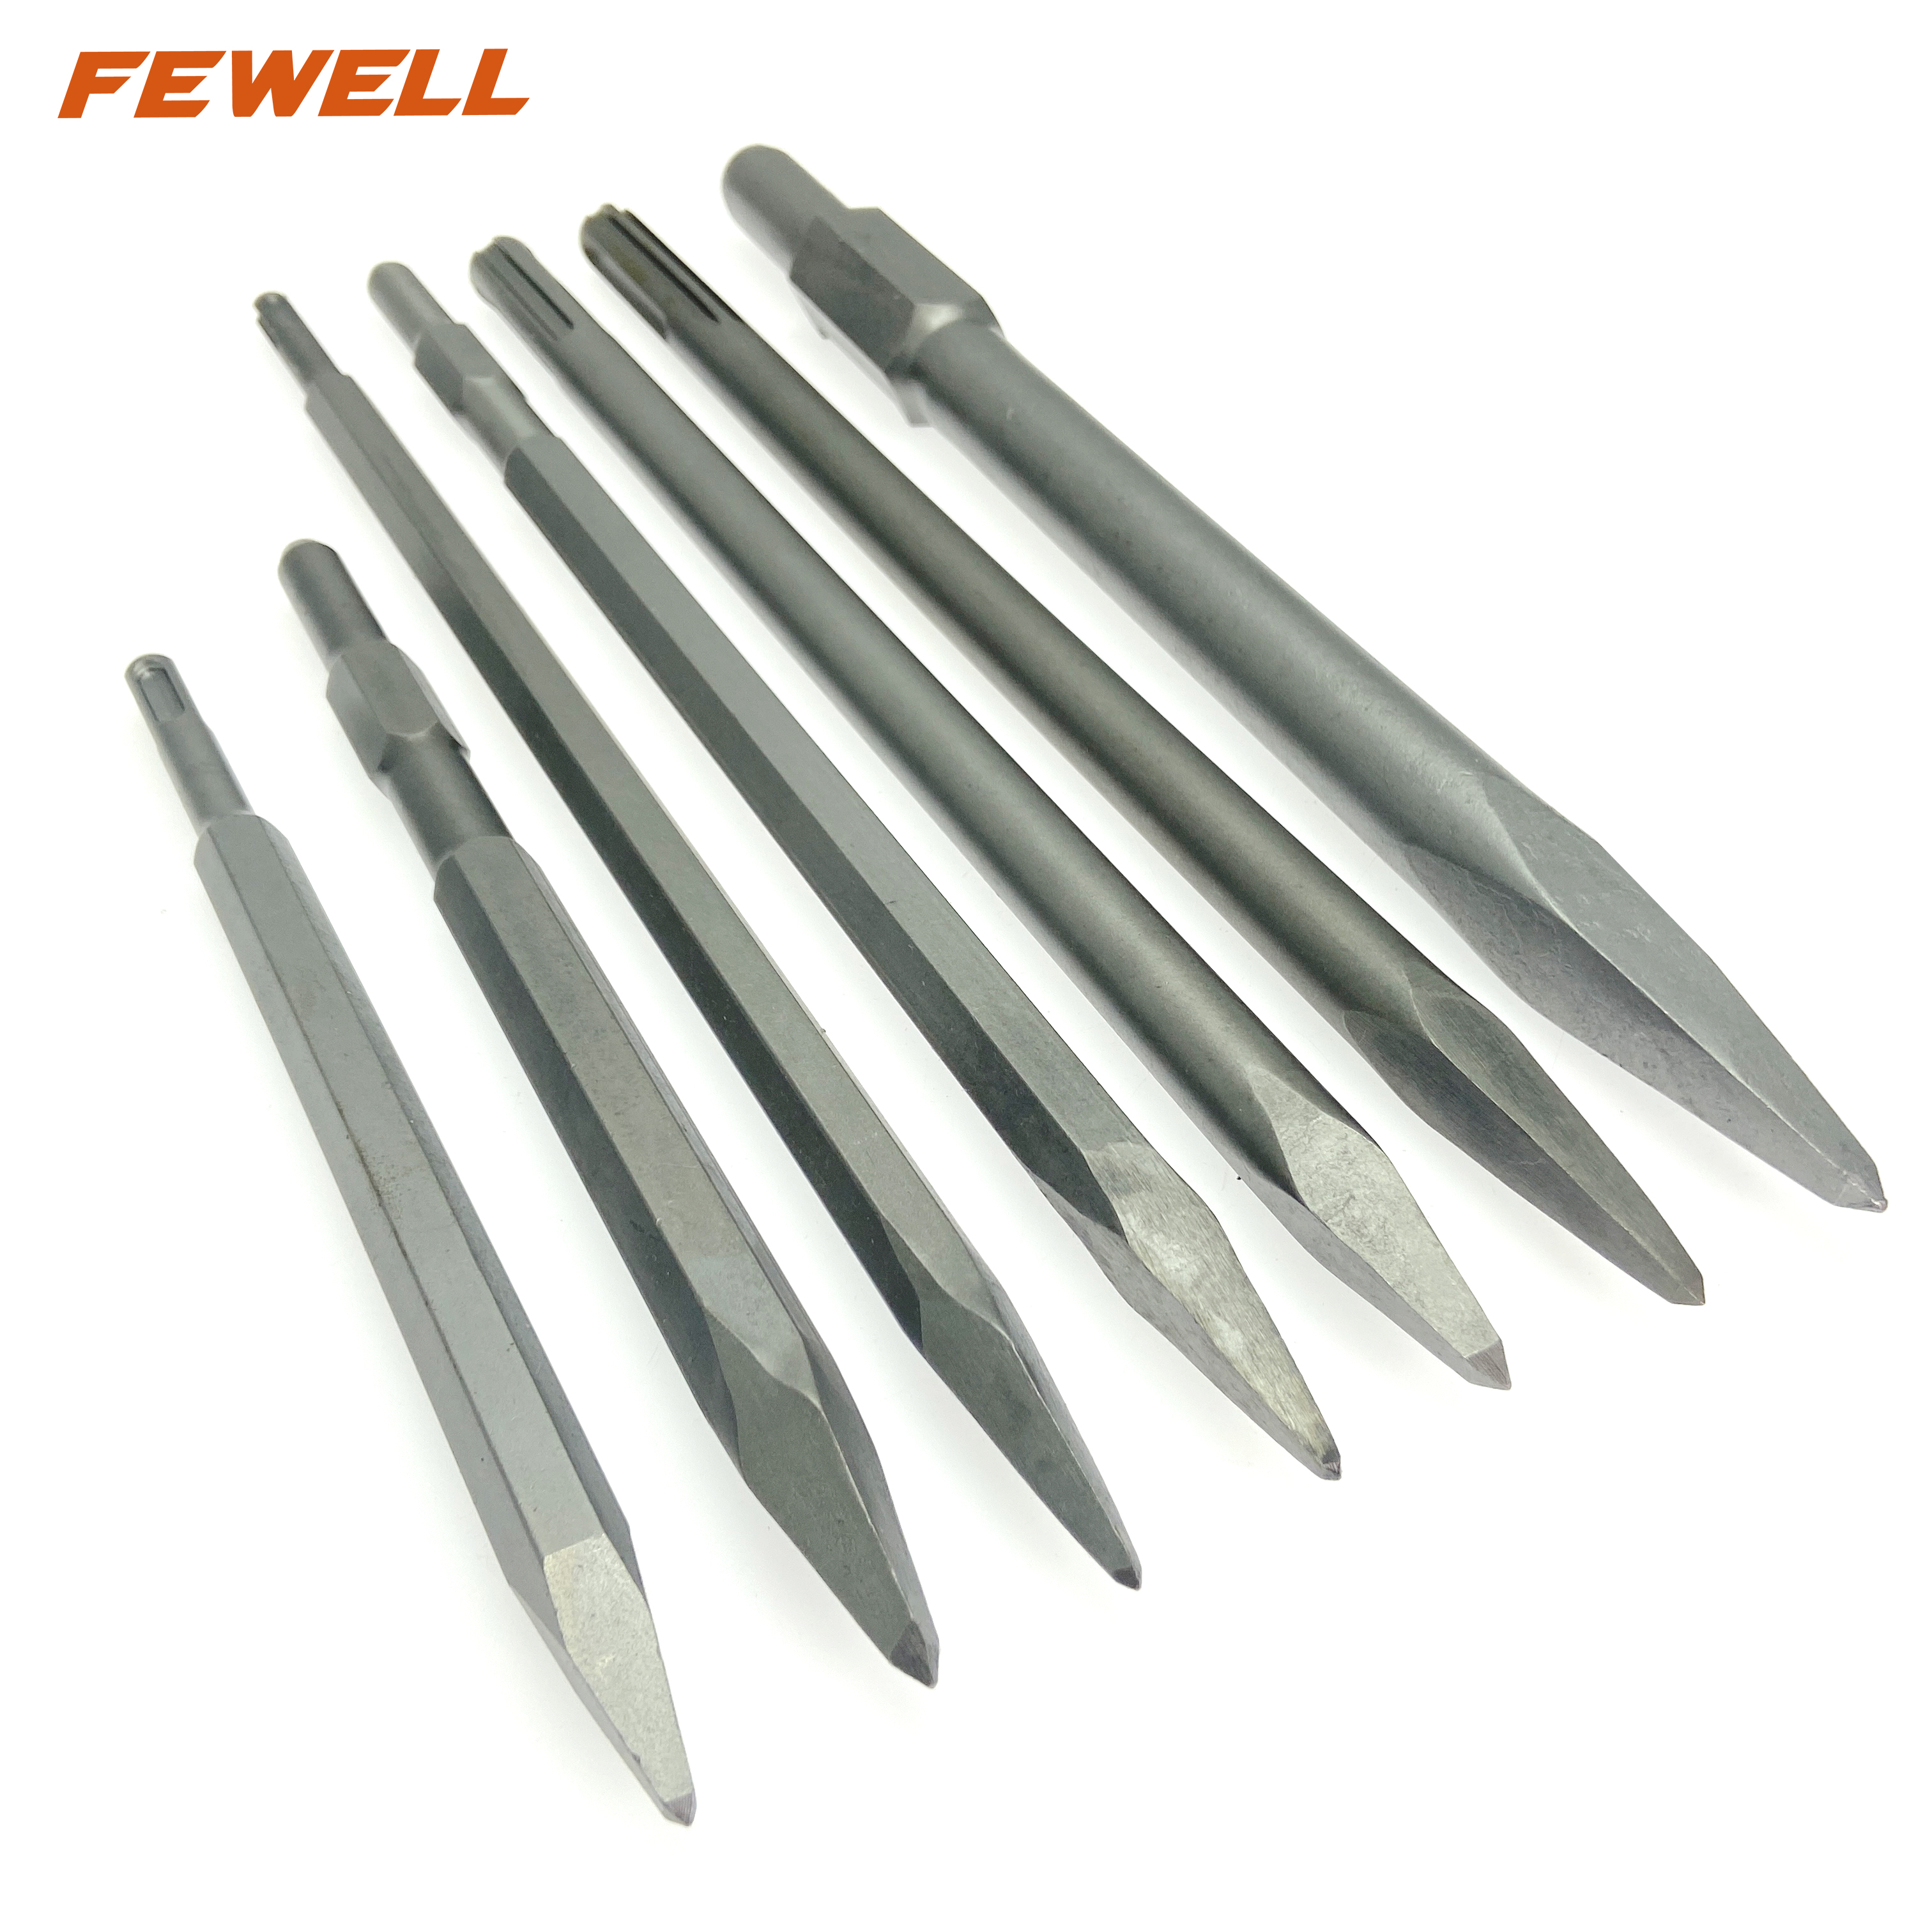 High quality 17x20mm Electric Hammer Drill Bit Hex shank Flat Chisel for tile Masonry Concrete Brick stone